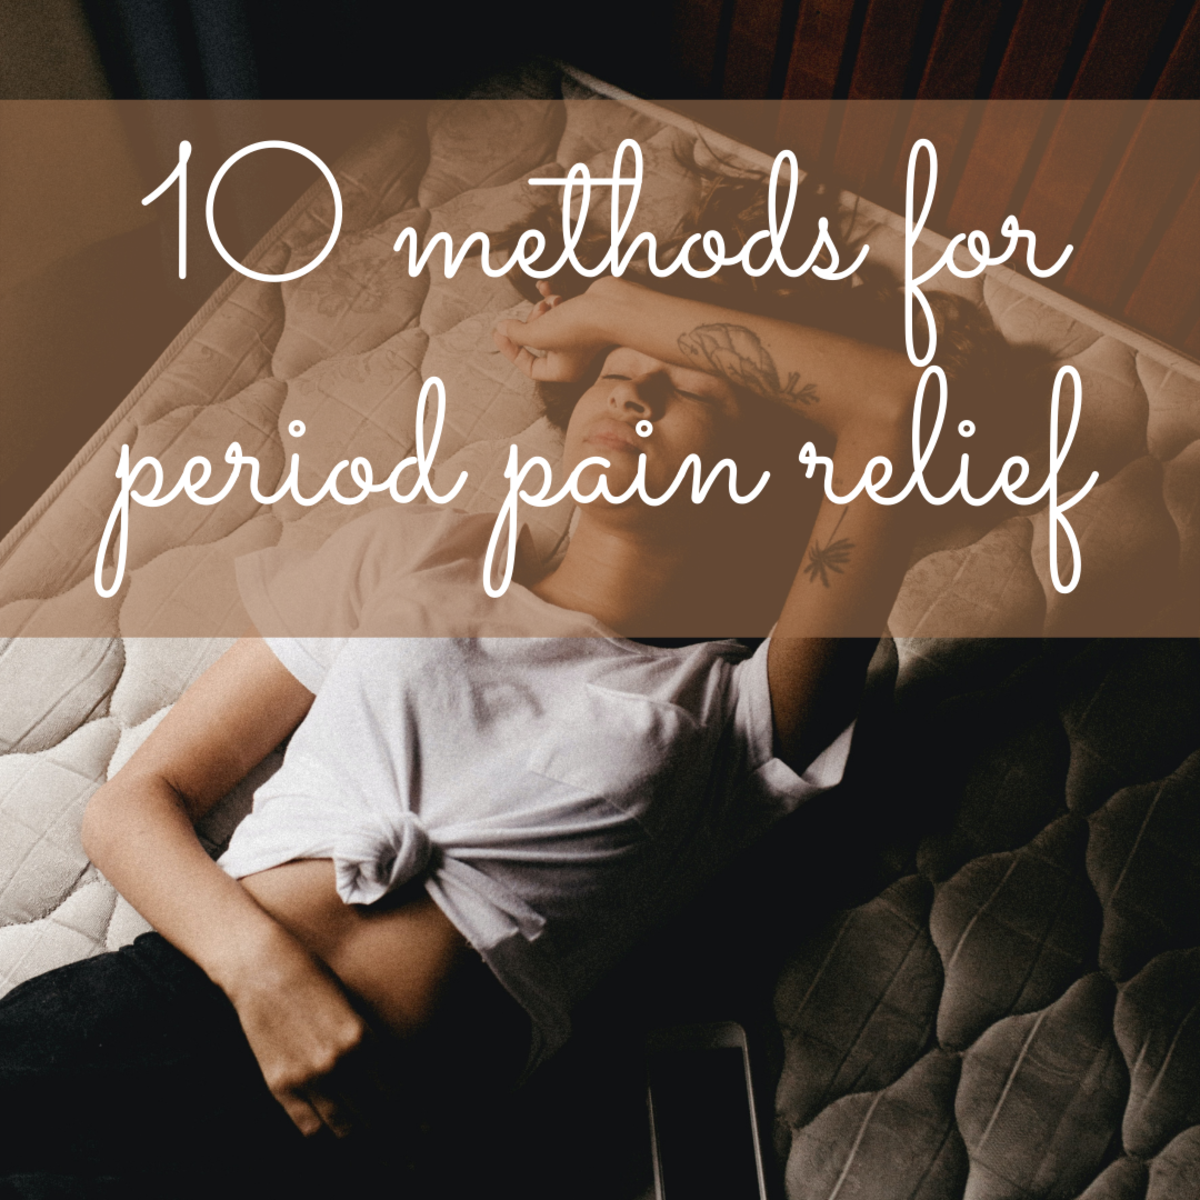 Battling cramps? Here are some solutions!